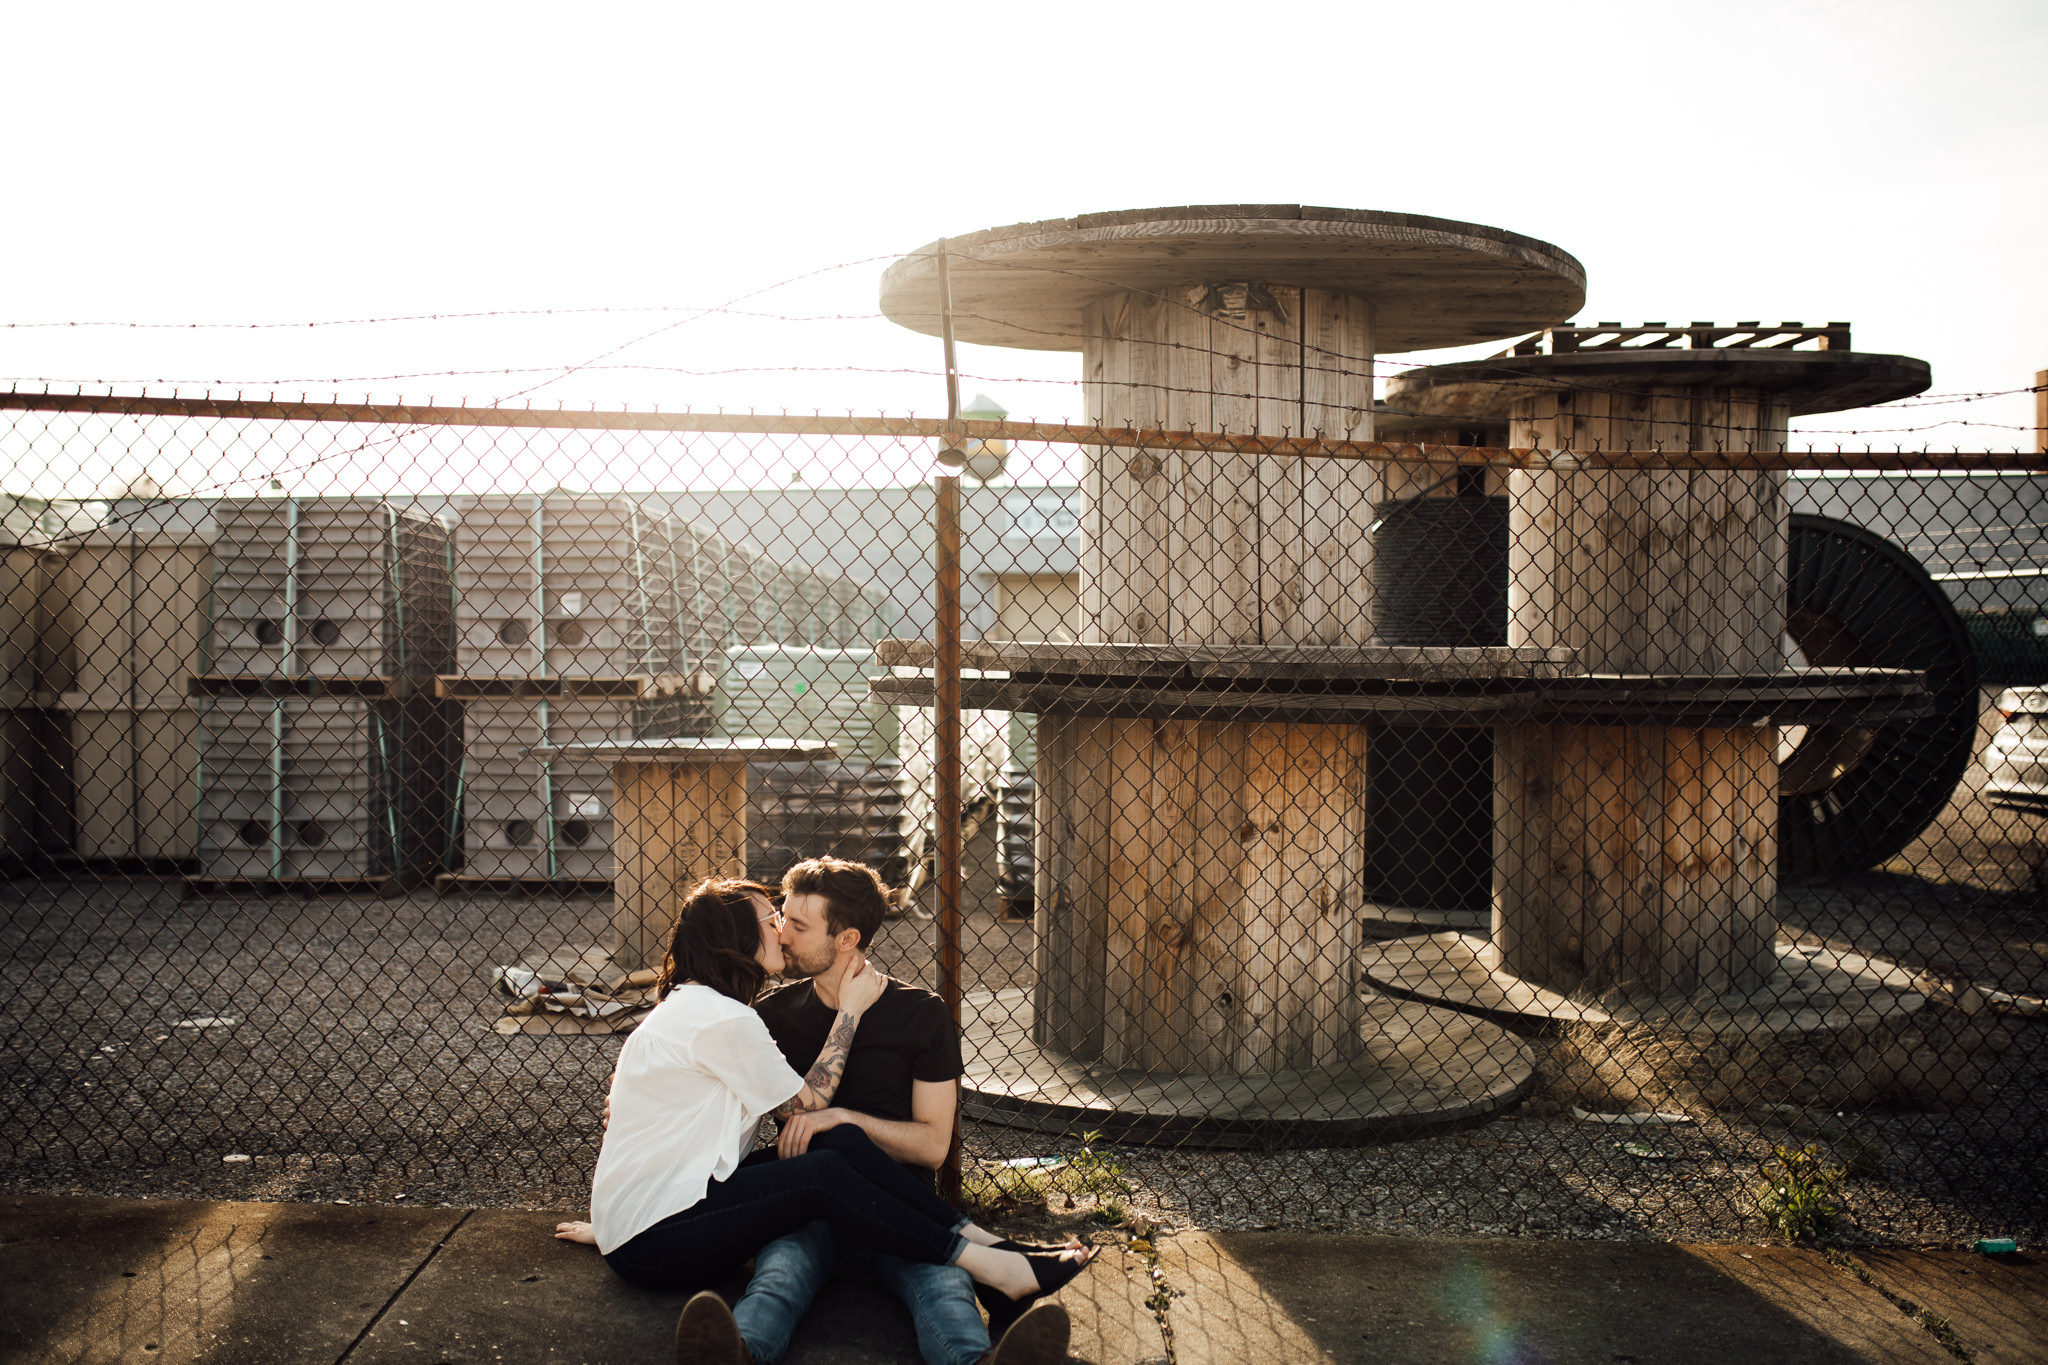 memphis-wedding-photographer-the-warmth-around-you-unique-colorful-engagement-pictures (43 of 80).jpg